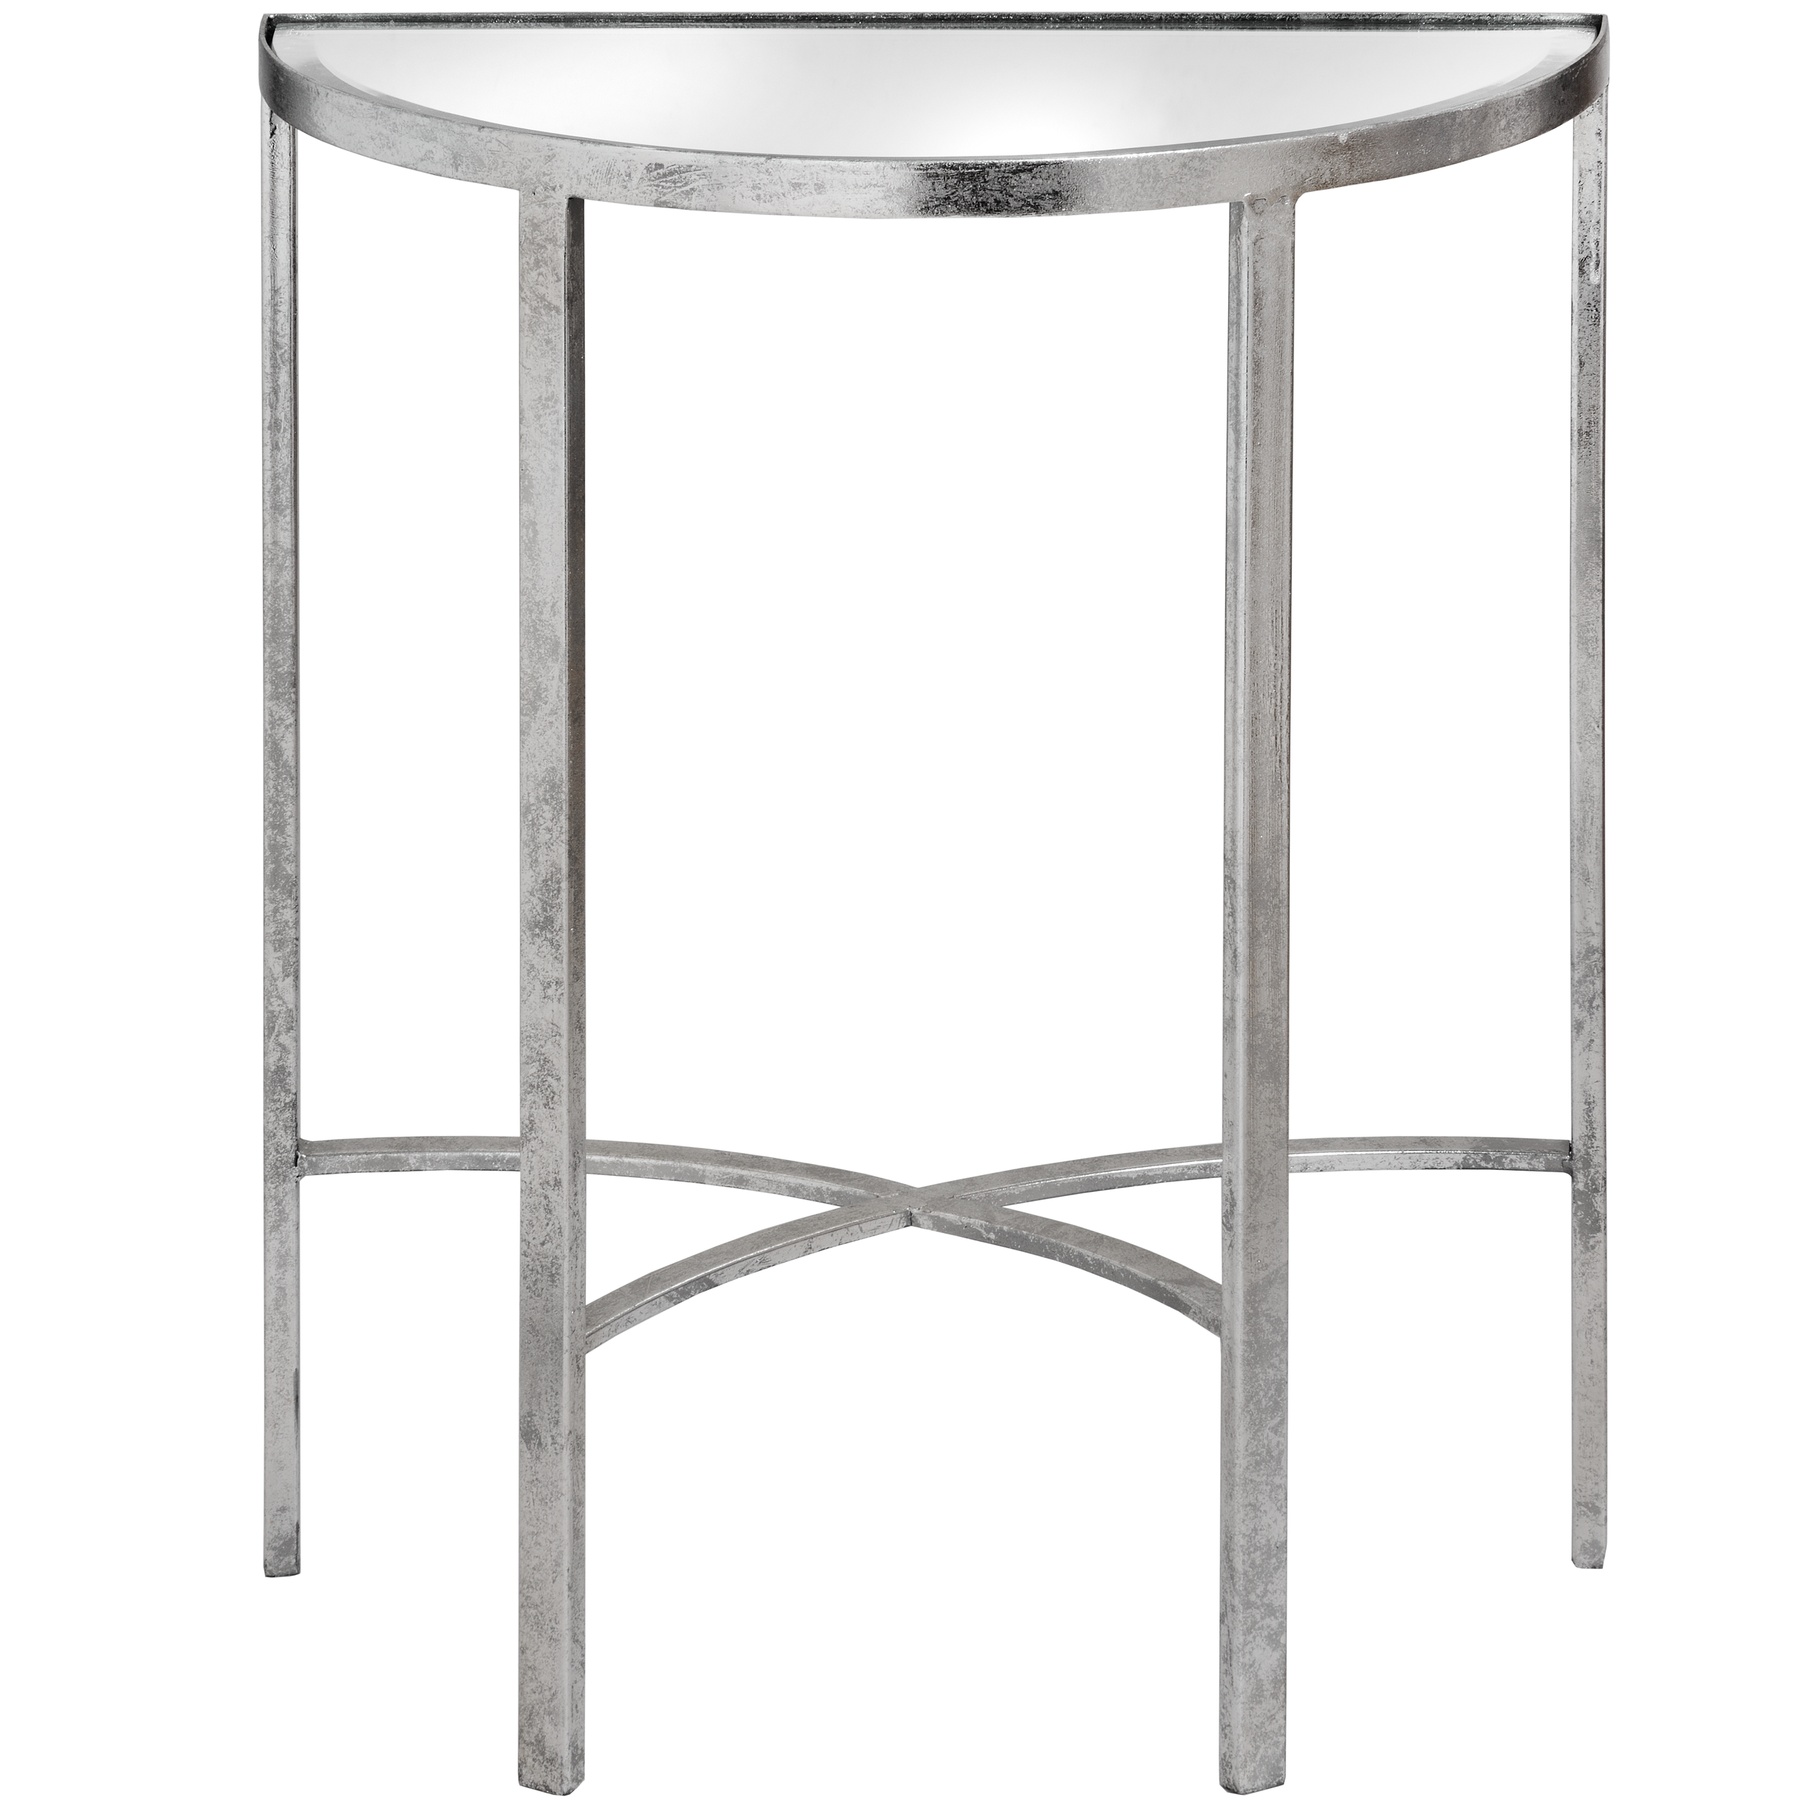 Mirrored Silver Half Moon Table With Cross Detail - Image 1